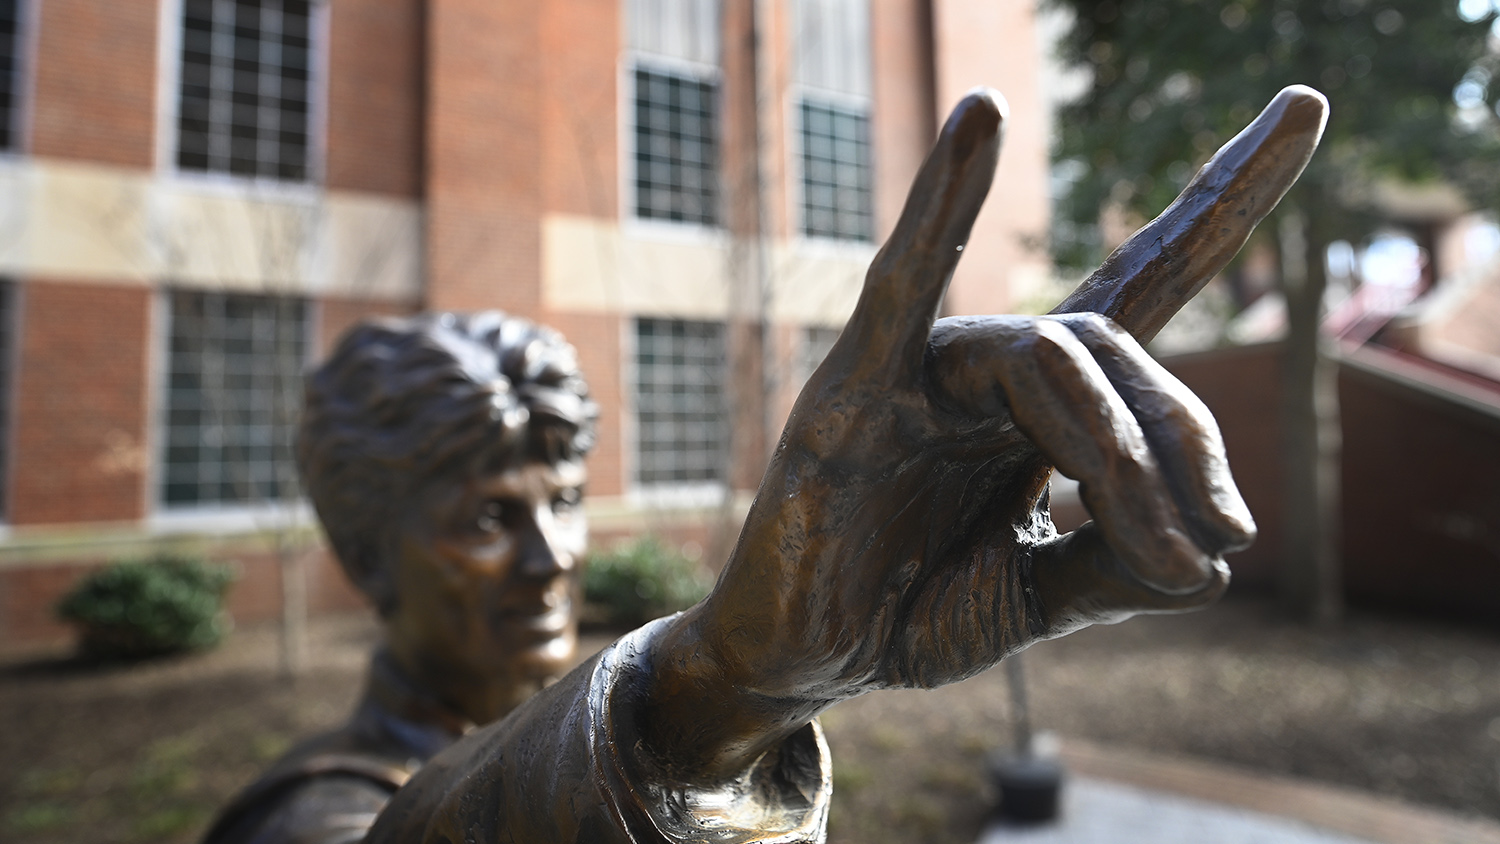 up close photo of statue of former NC State Wolfpack women's coach Kay Yow with hand in classic "wolf" gesture